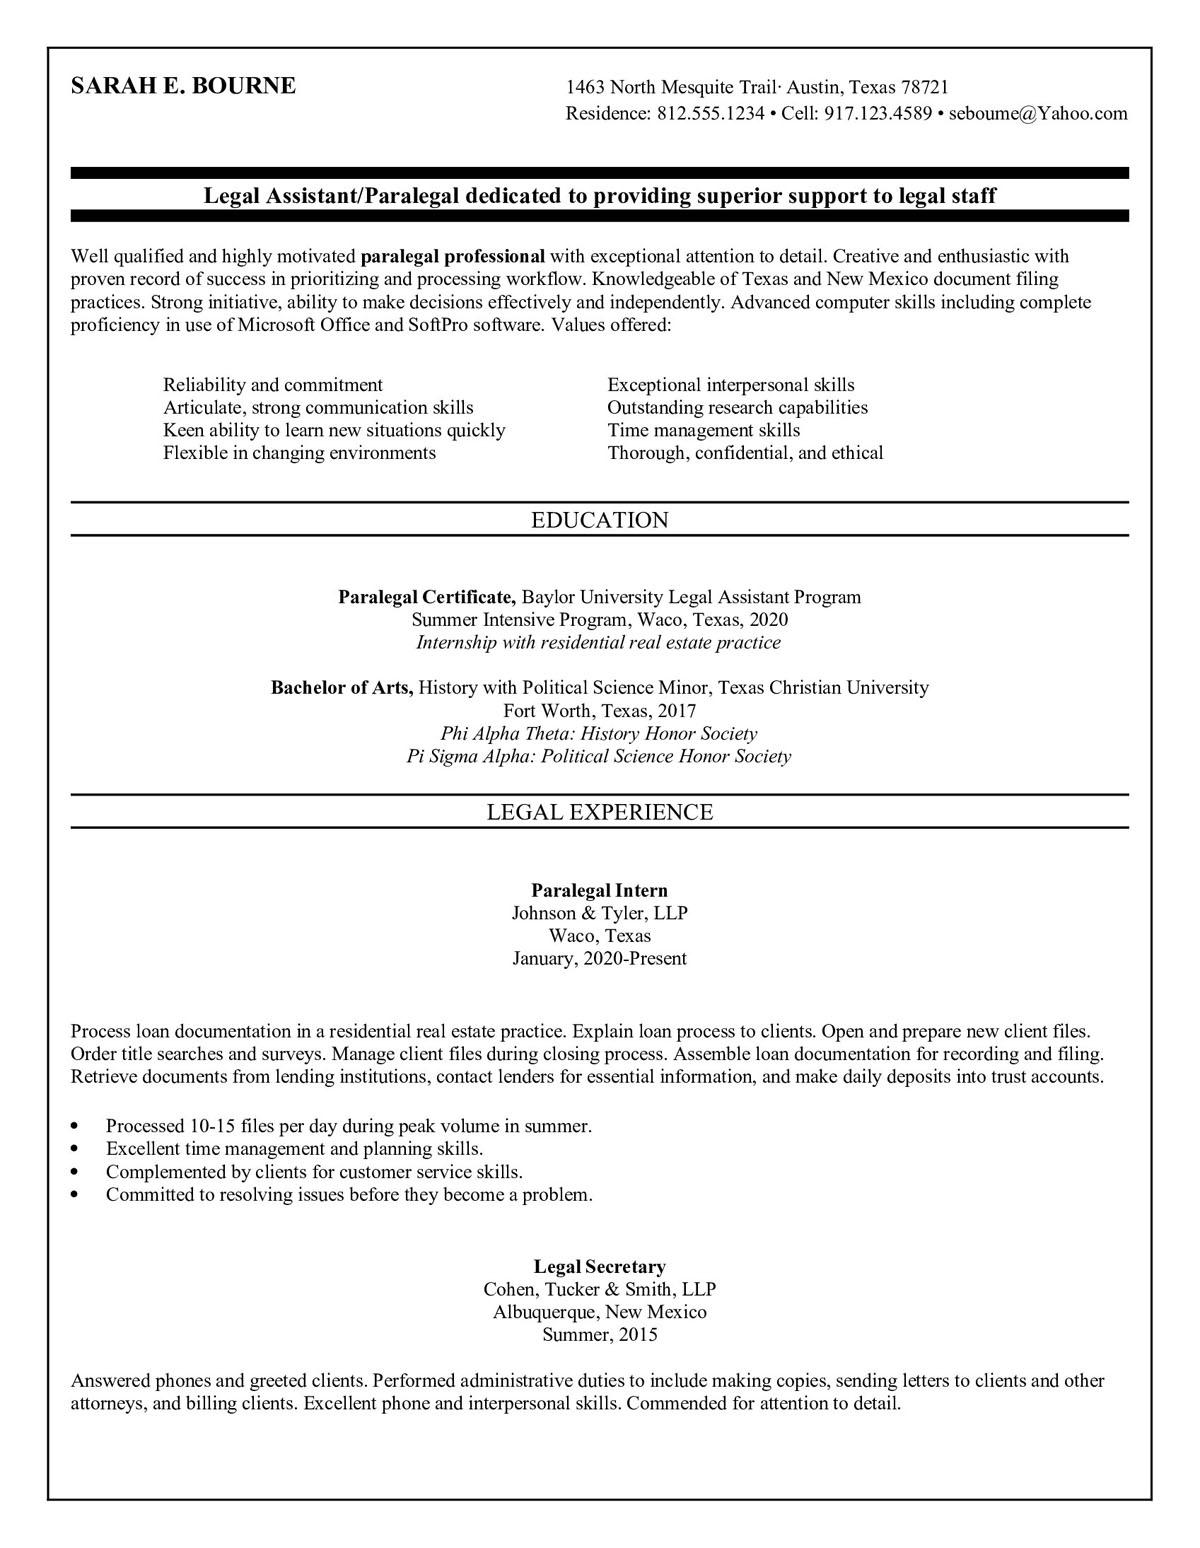 Sample resume: Paralegal, Entry Level, Combination